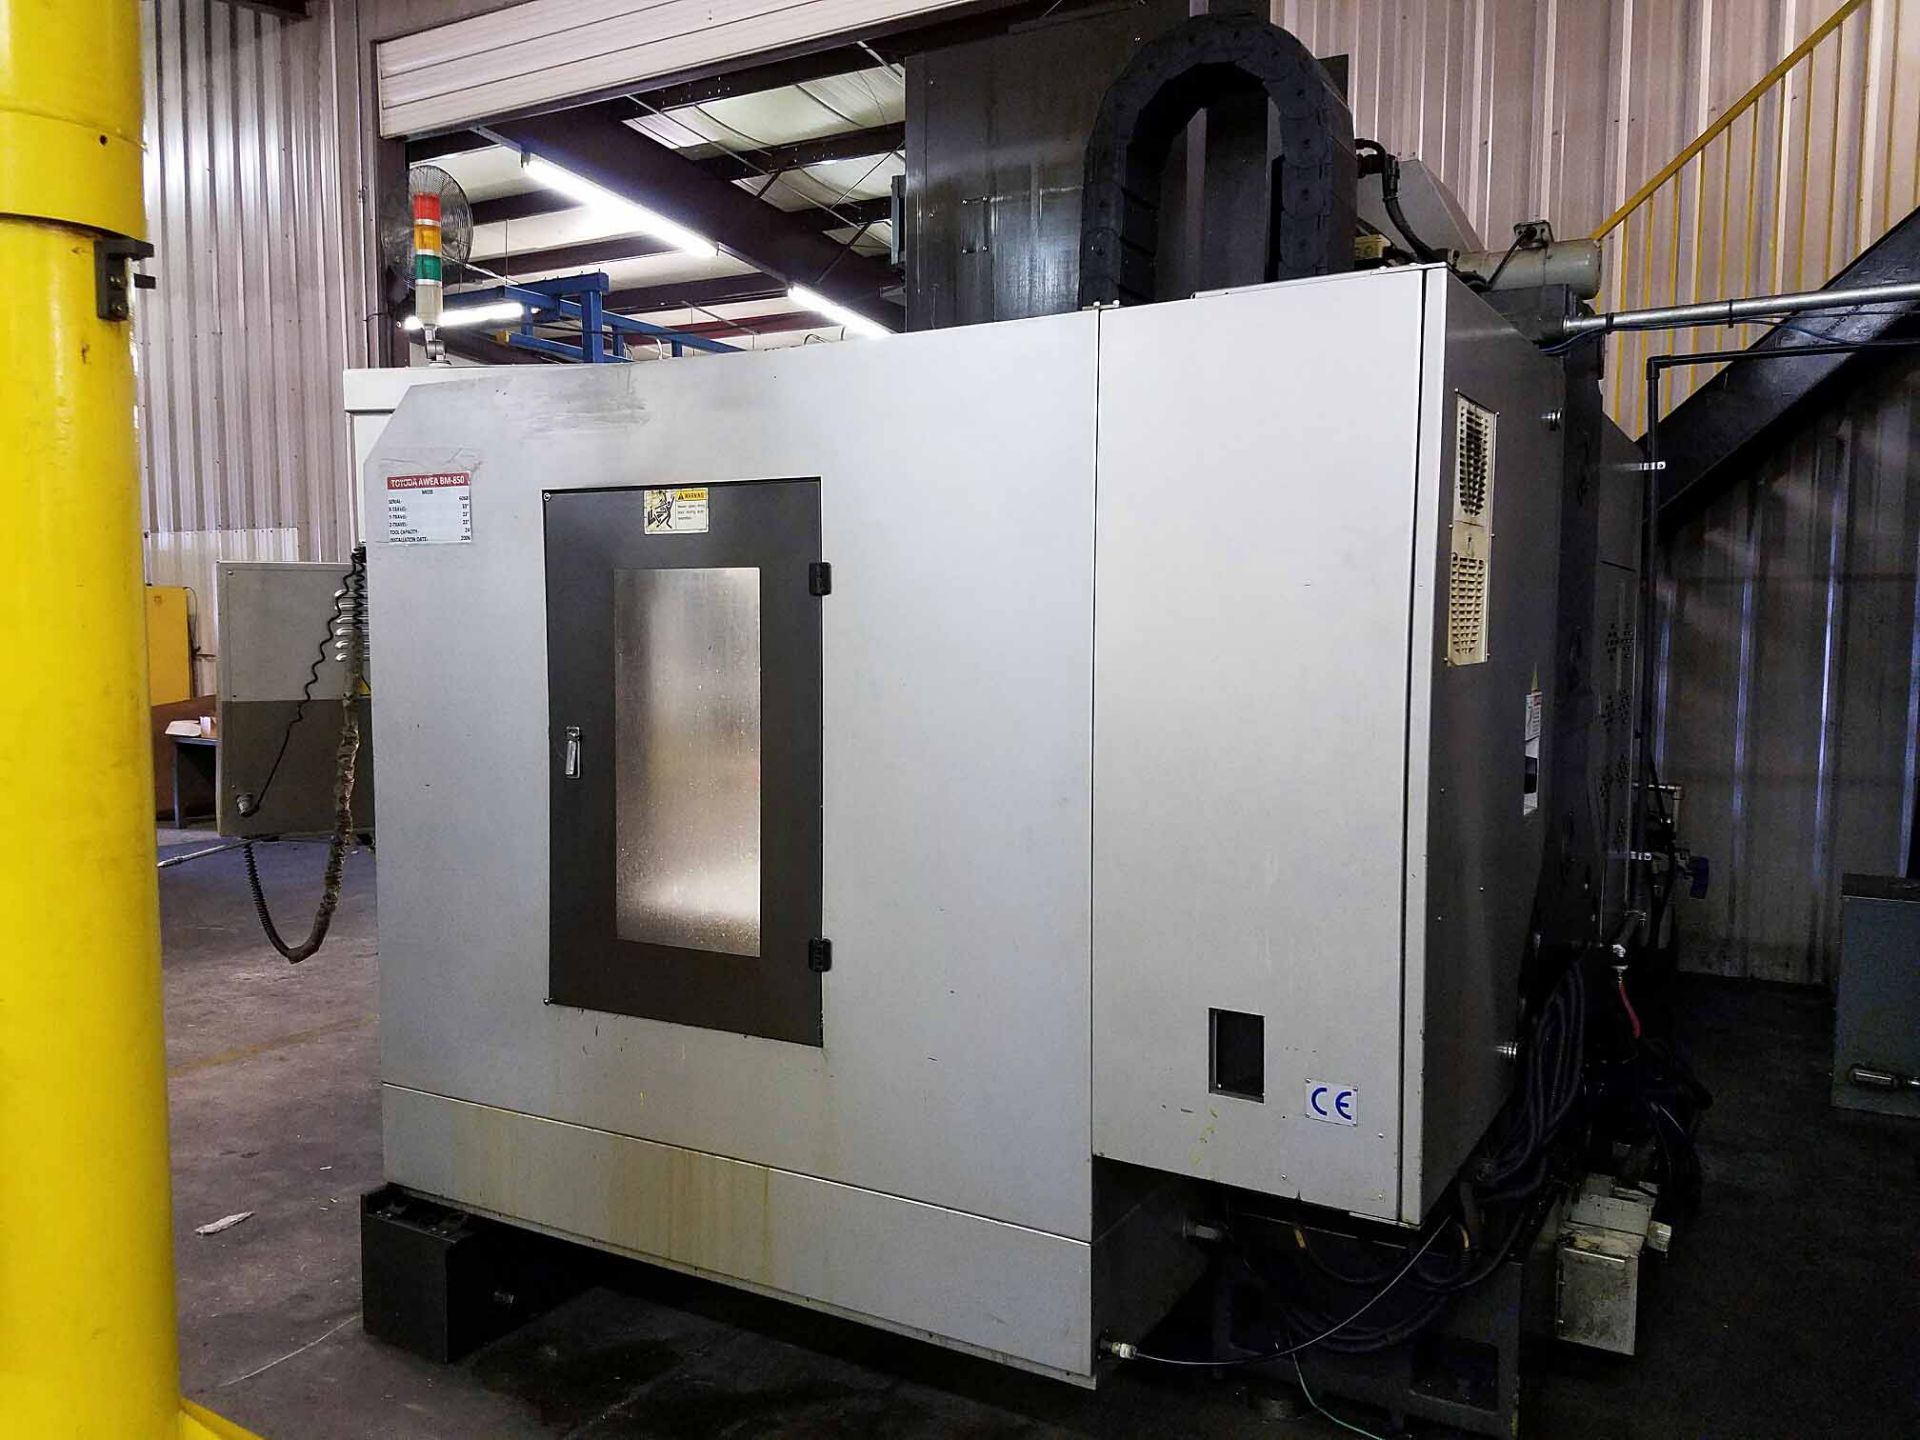 VERTICAL MACHINING CENTER, TOYODA AWEA MDL. BM-850, new 2006, Fanuc Series 18i-MB CNC control, 33" - Image 11 of 13